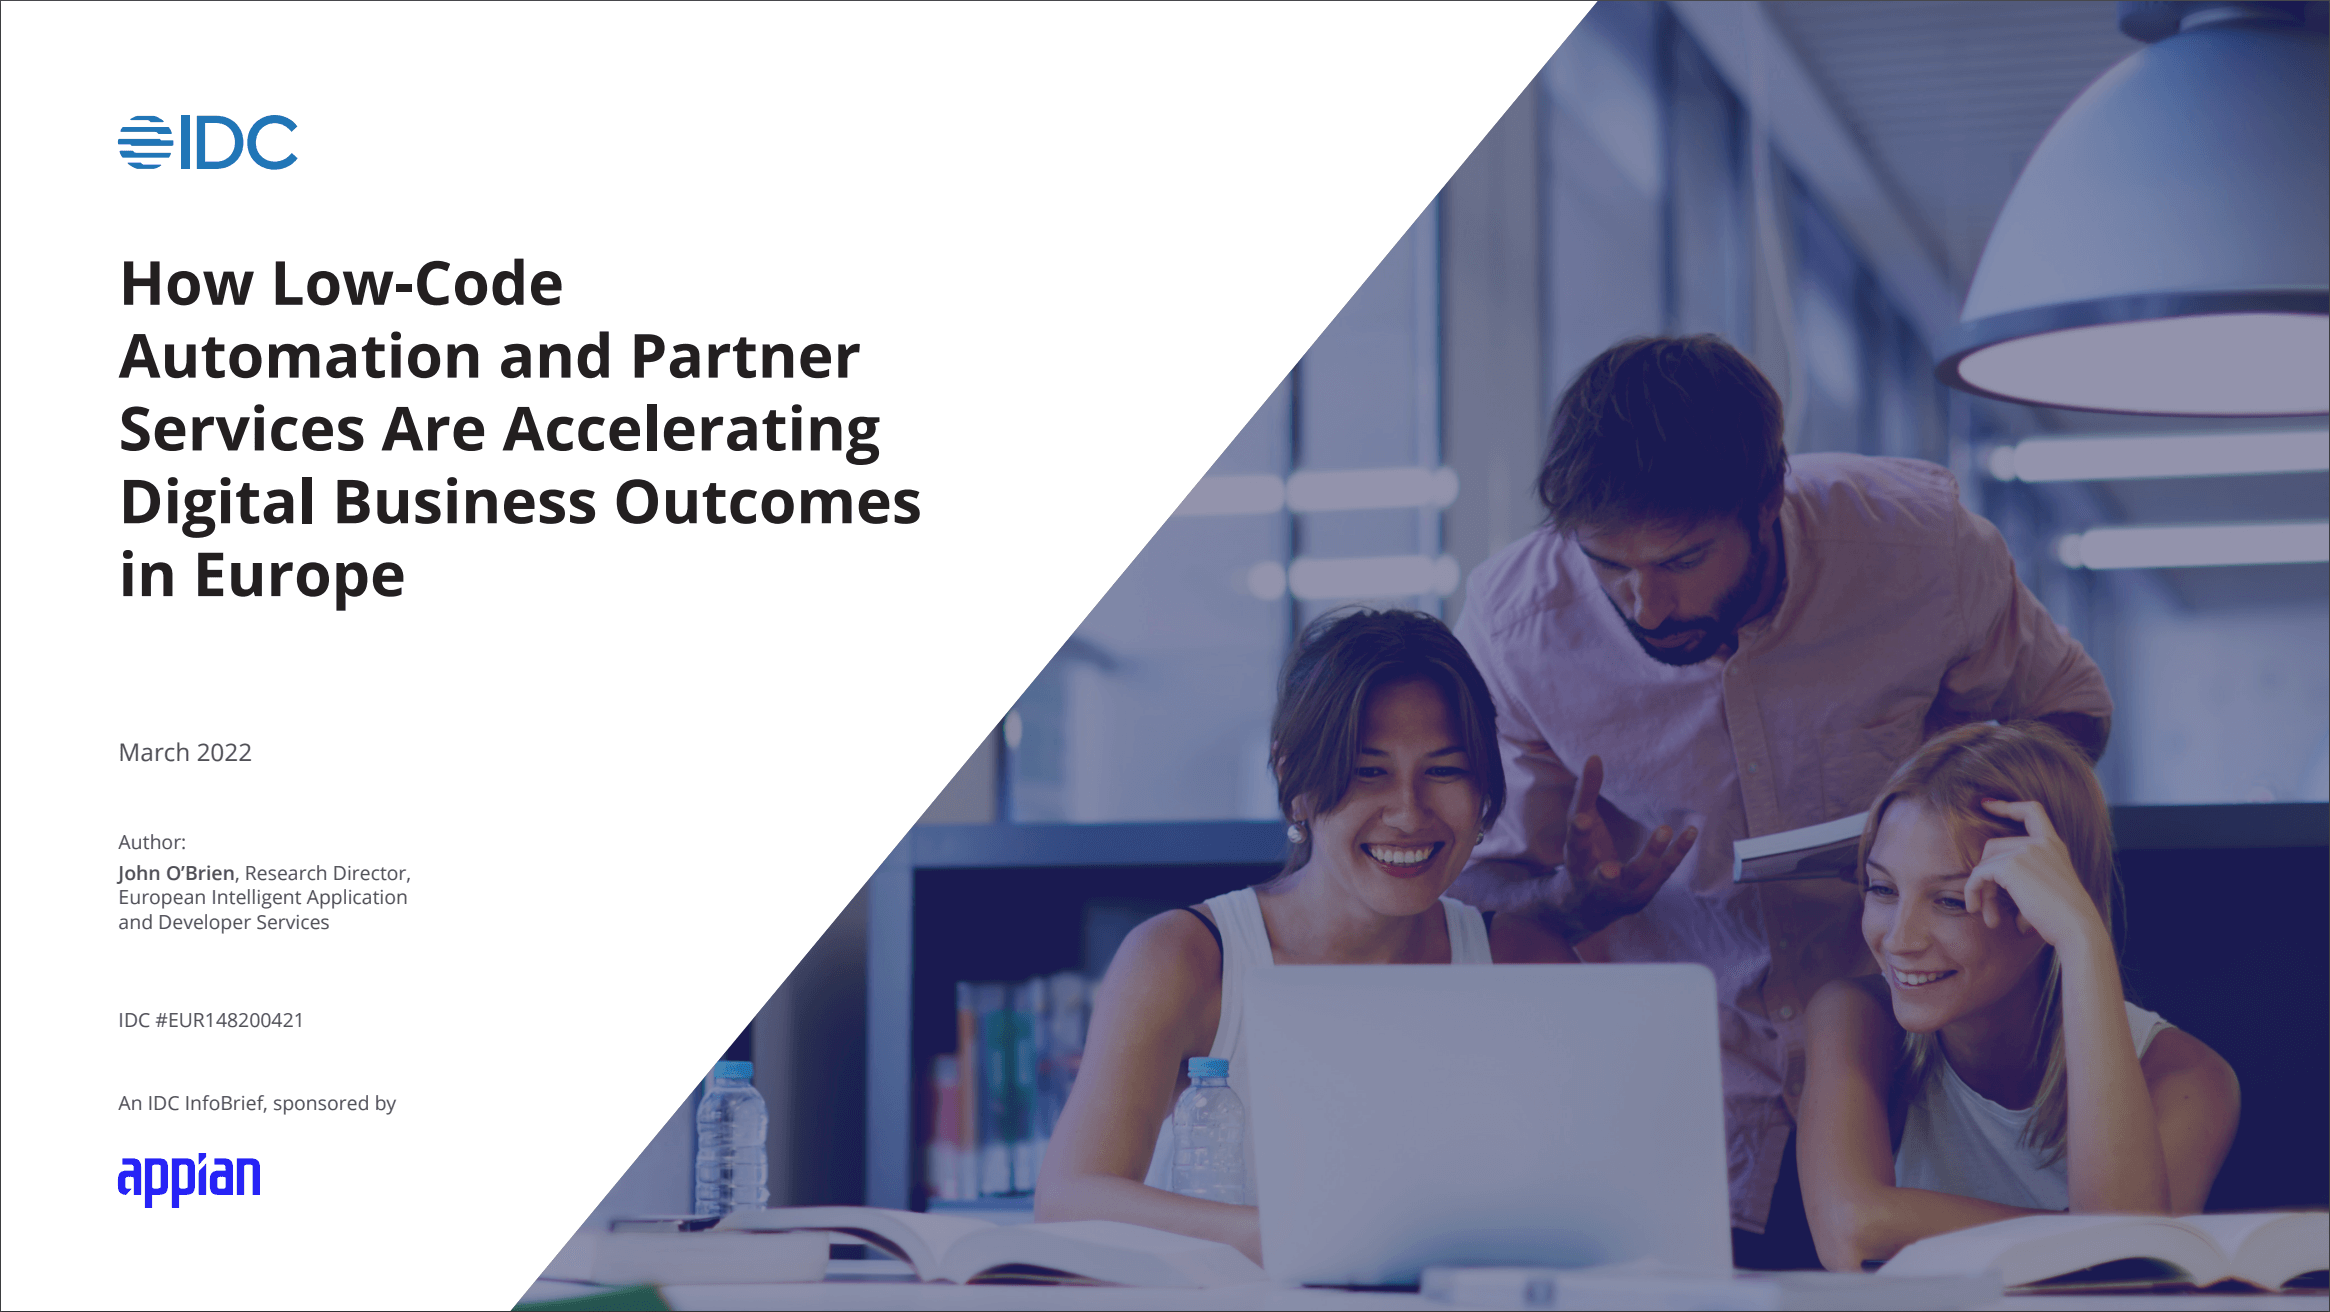 IDC Infobrief: How Low-Code Automation and Partner Services are Accelerating Digital Business Outcomes in Europe